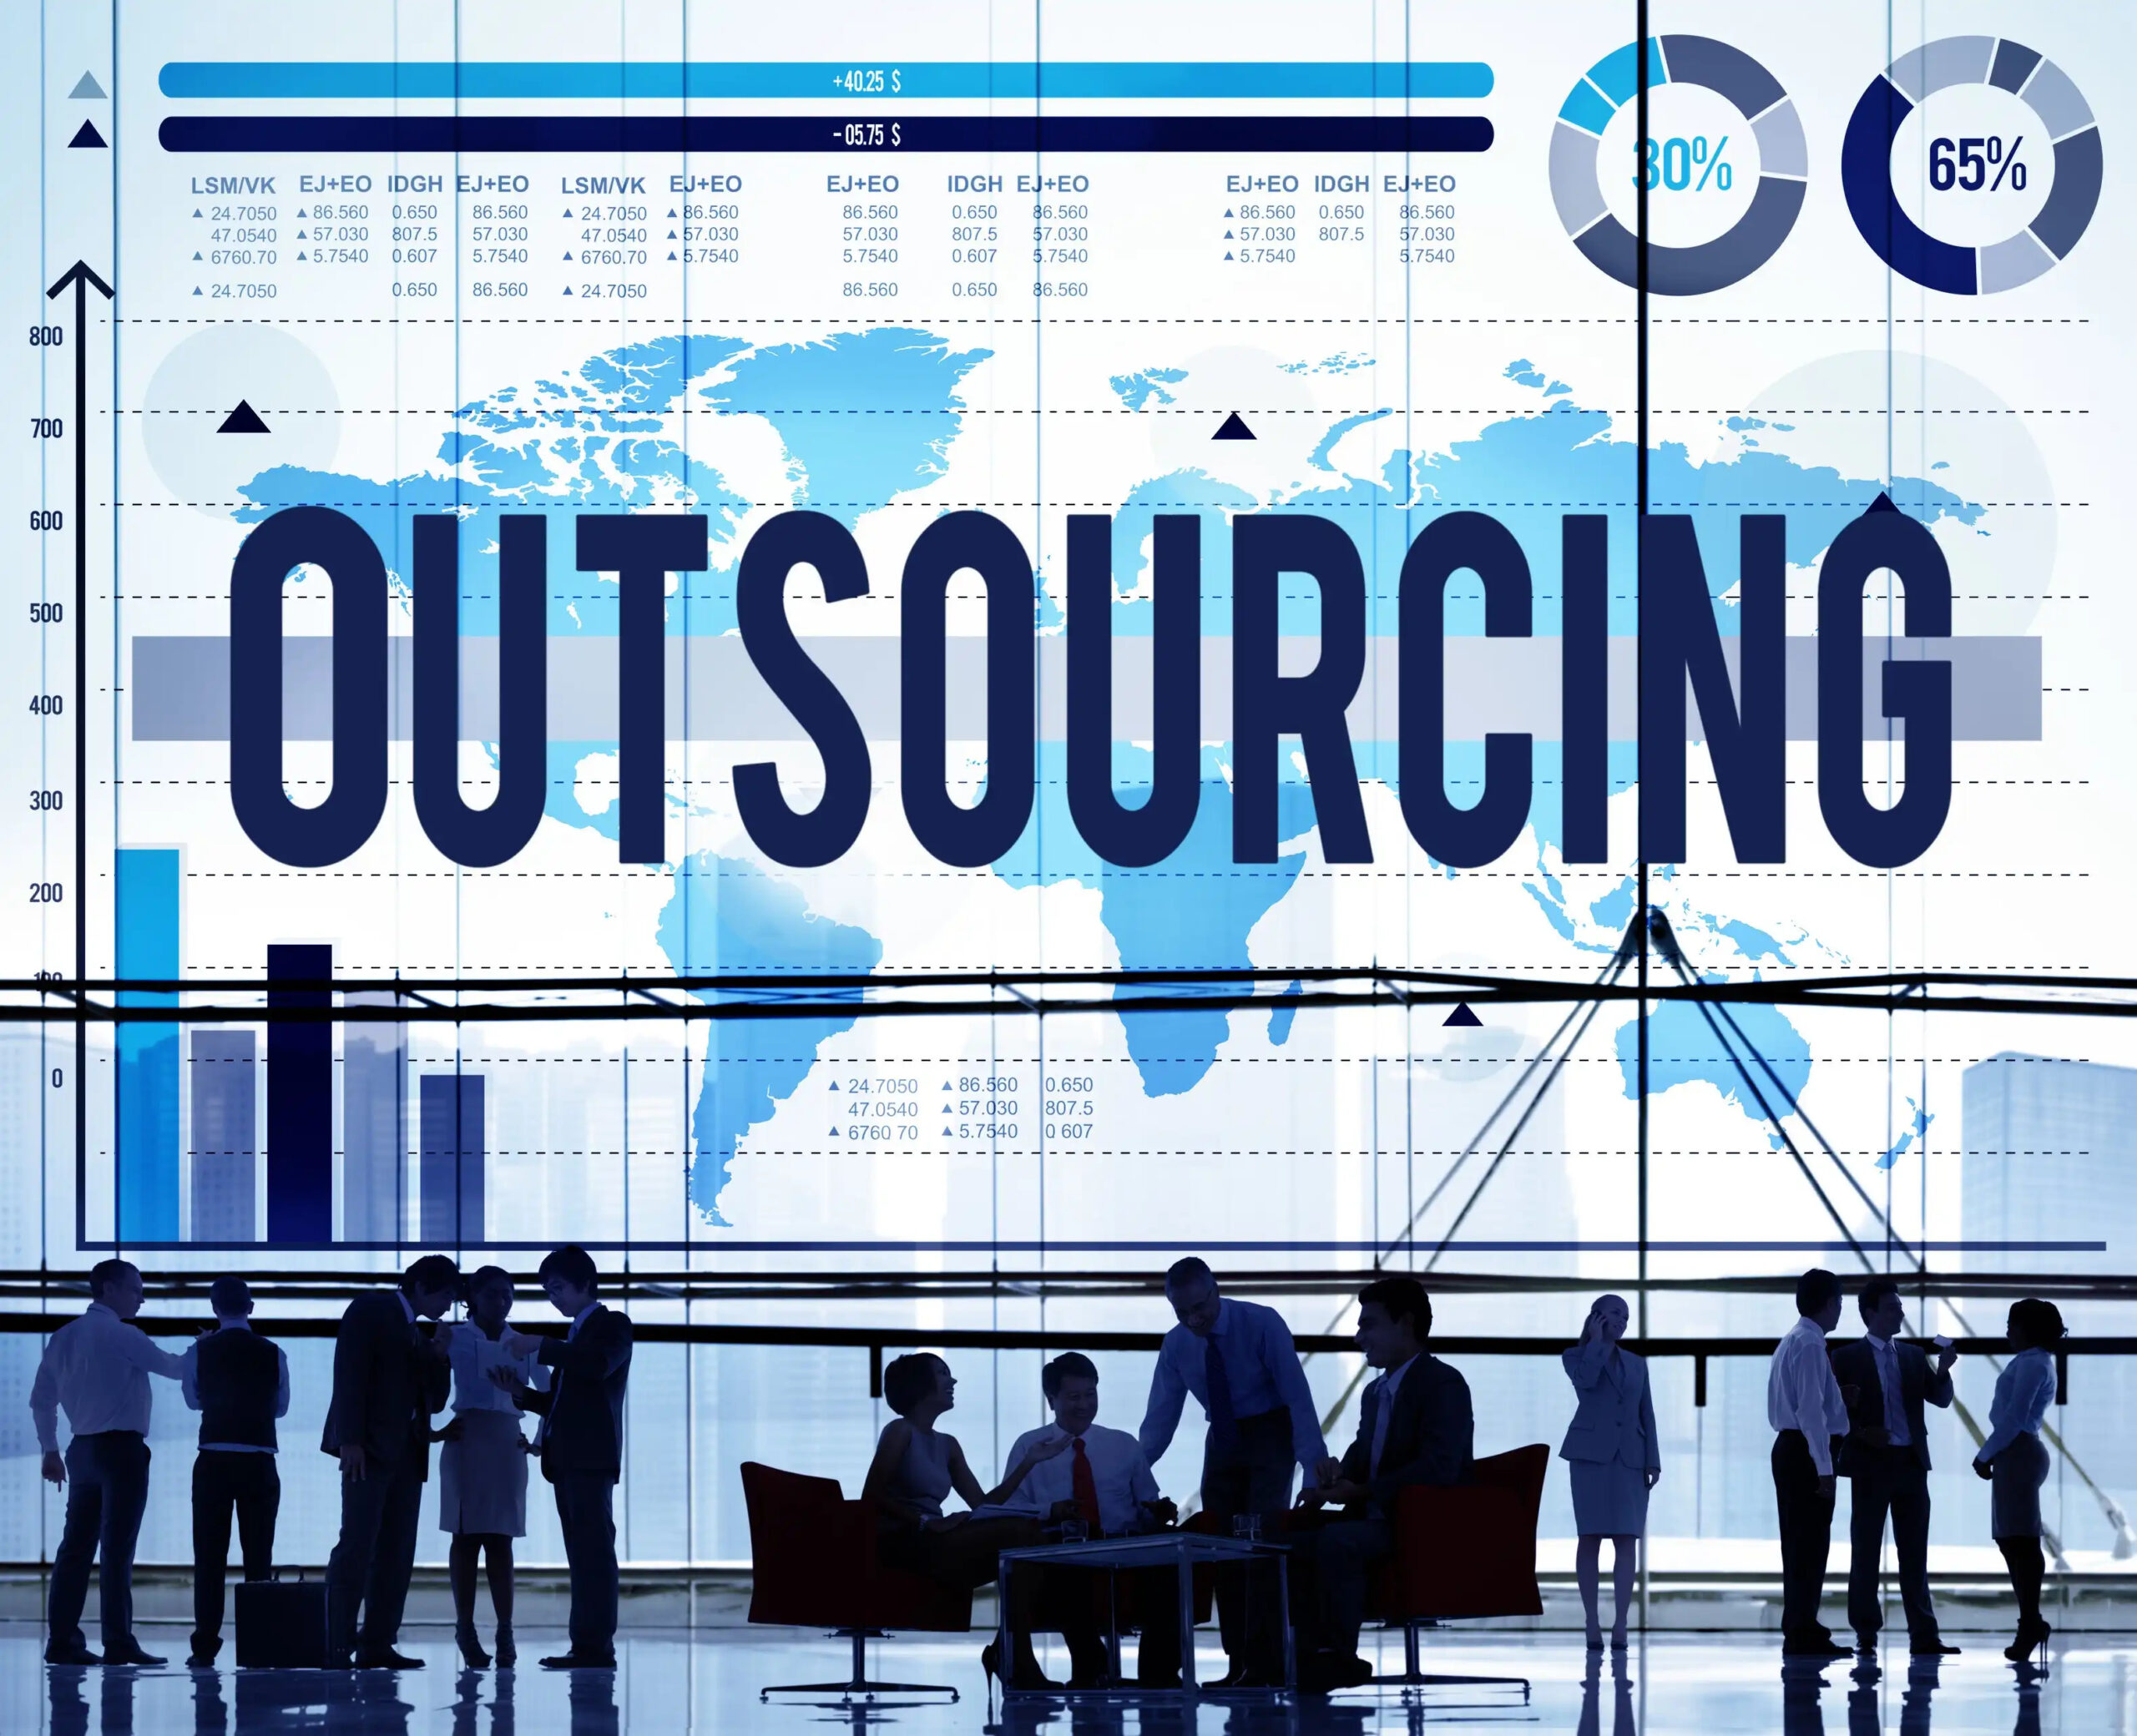 HOW BUSINESS PROCESS OUTSOURCING CAN INCREASE THE PRODUCTIVITY OF YOUR WORKFORCE